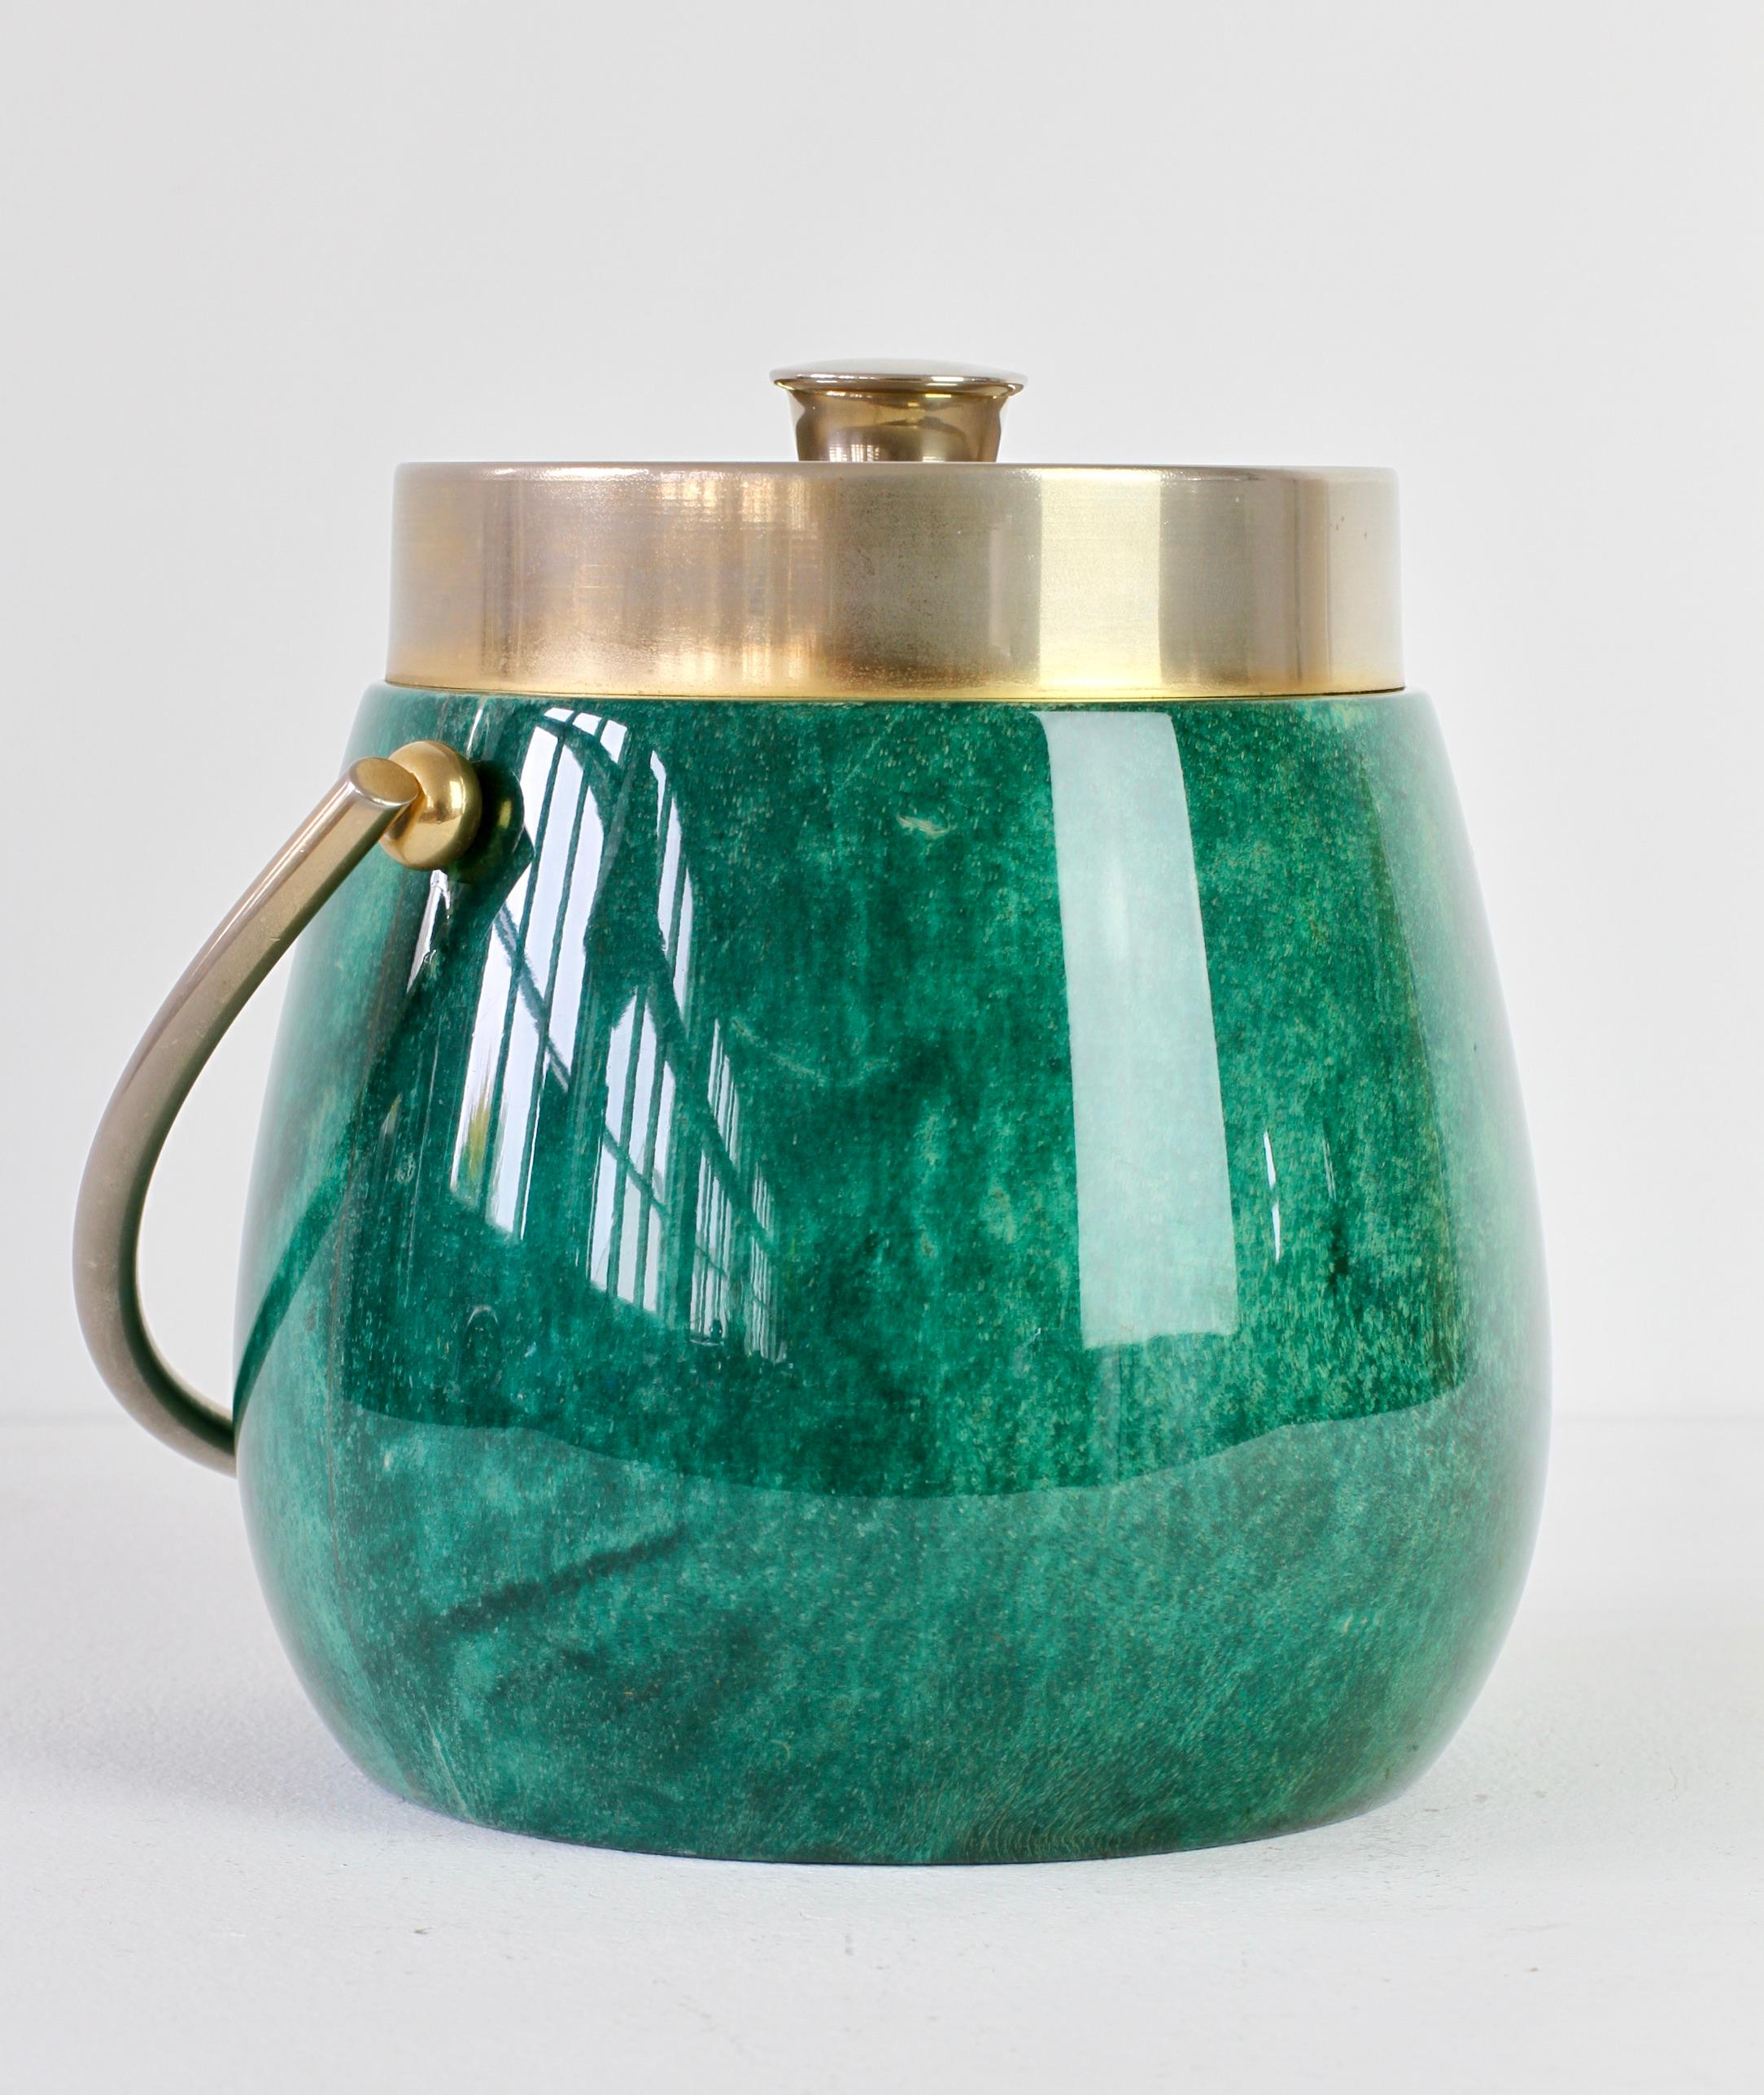 Midcentury Italian 1960s ice bucket or ice-cube holder by Aldo Tura, Milan. Signed with original label, green colored and lacquered goatskin leather combined with cast metal carrier or handle is perfect for carrying ice to your guests - perfect with